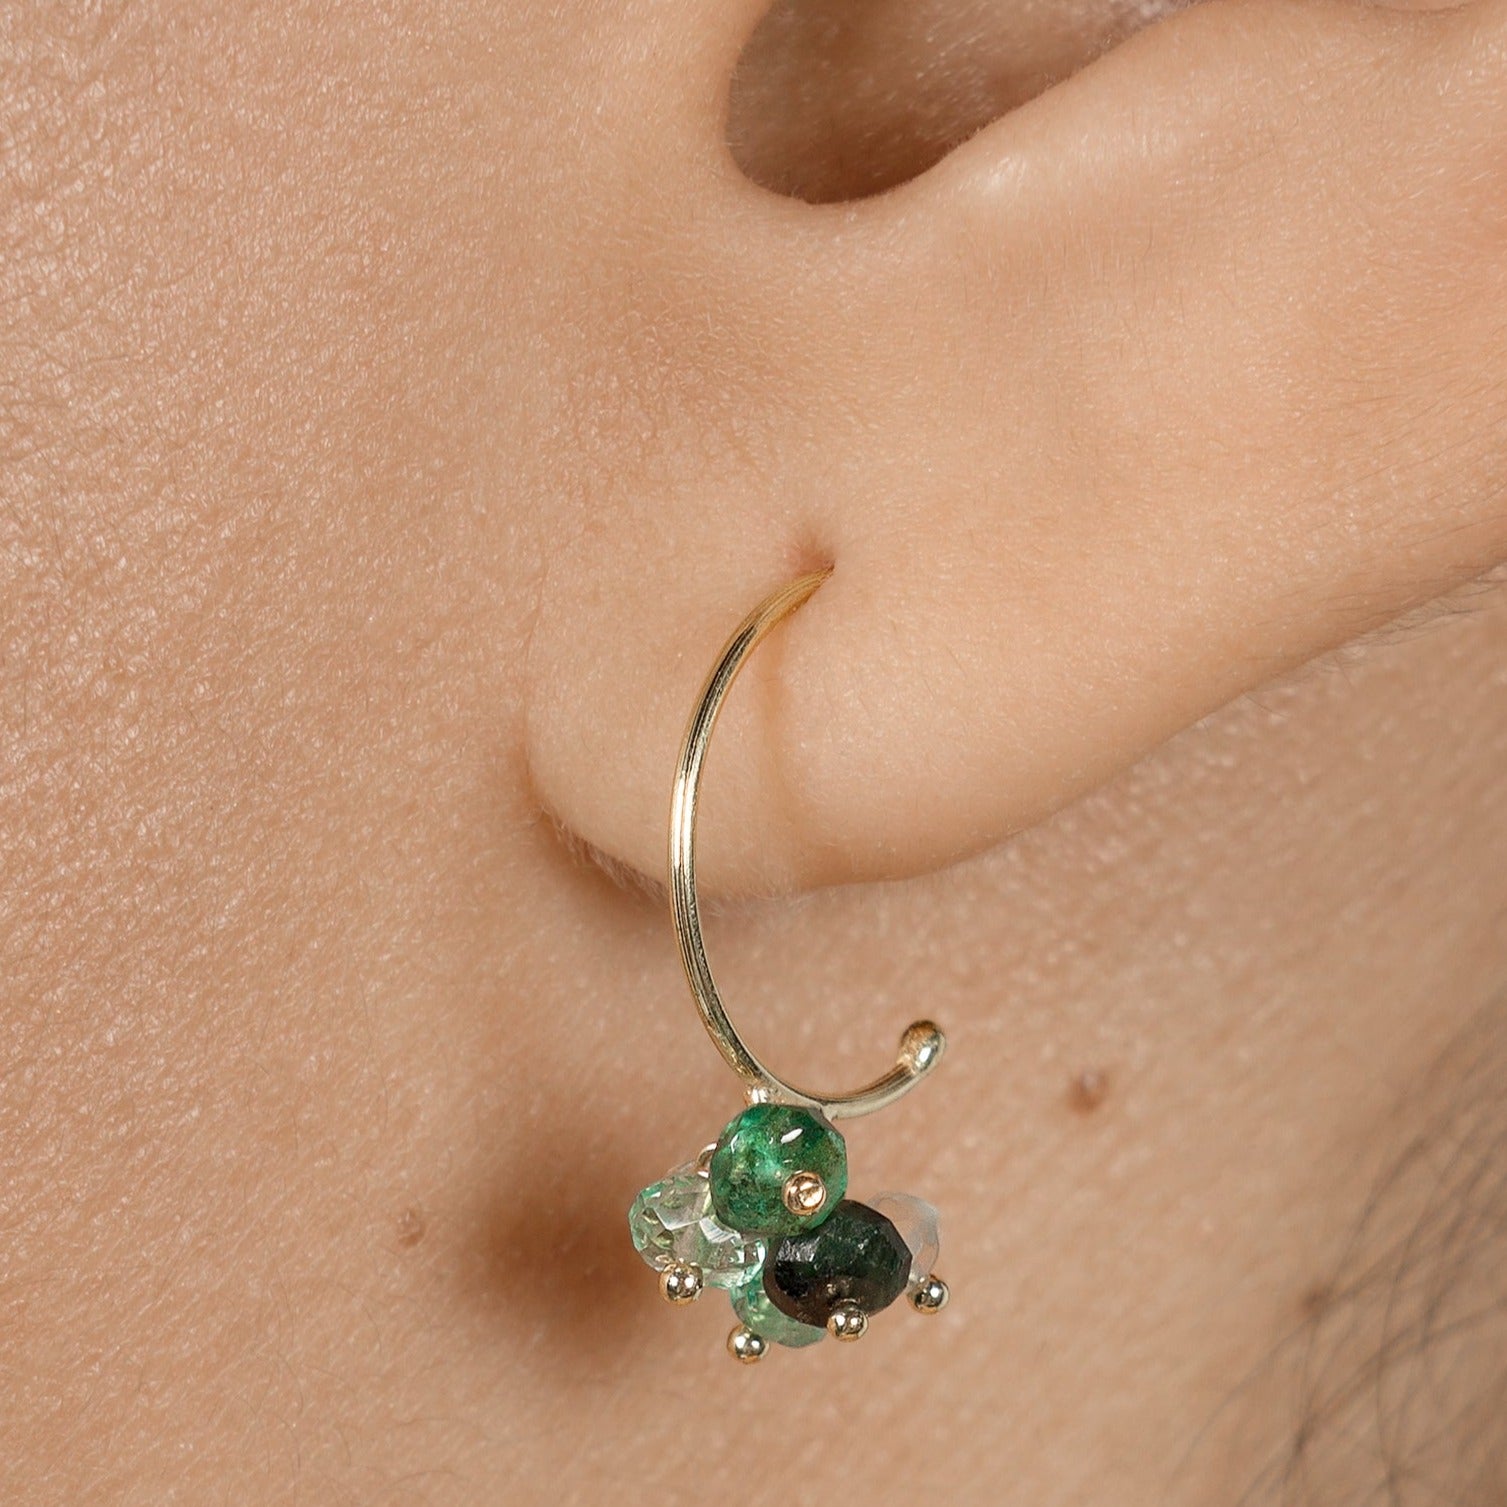 Sweet Peas Pogo Punk 18ct yellow gold small hoops with cluster of emerald beads in varying shades on model.